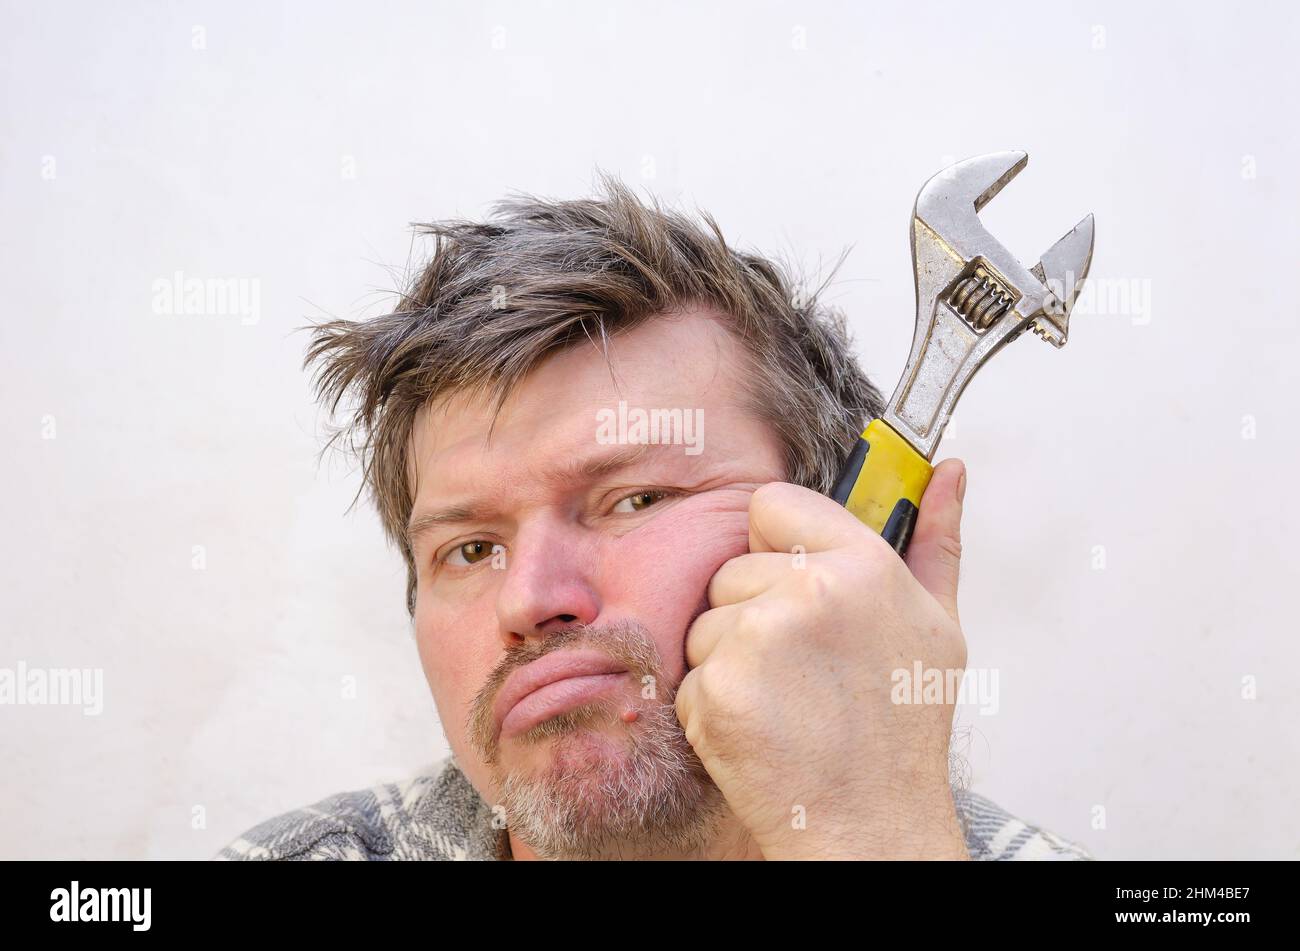 Portrait of a man with a pensive, tired face. The male supports his head with a fist and a wrench clenched in it. A man with tangled, disheveled hair Stock Photo